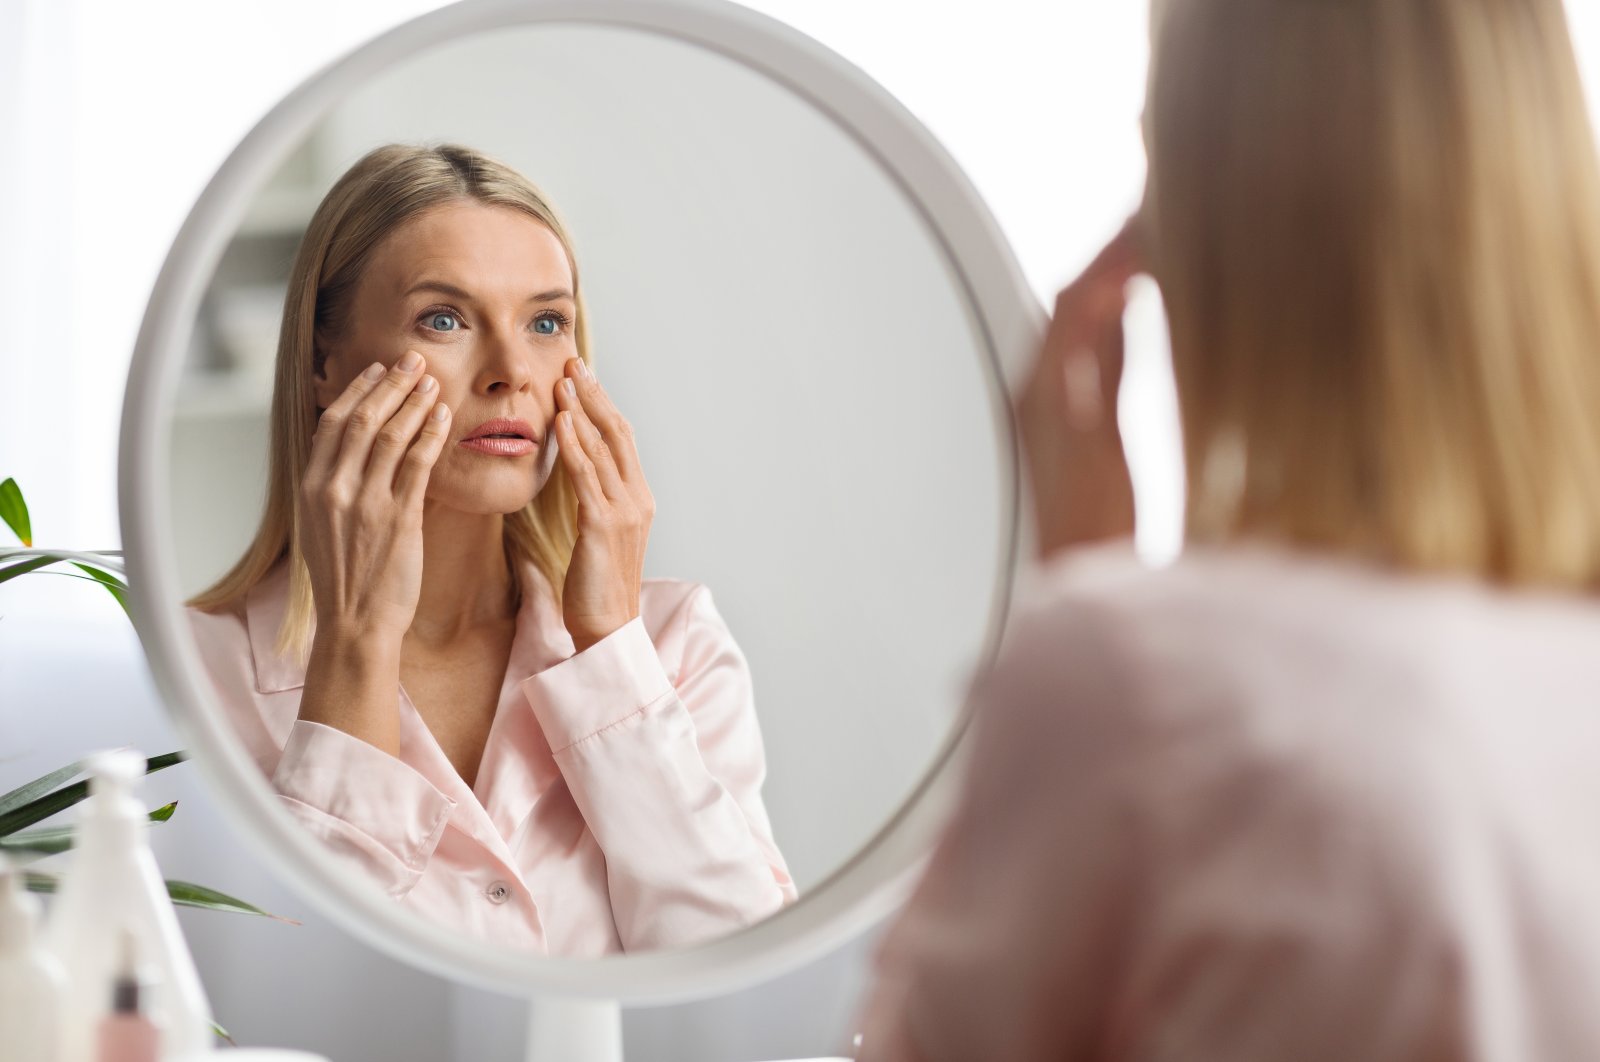 &quot;Our bodies change over time. Smooth skin develops lines along natural faults of expressed emotions, hair loses its color – or falls out completely, eyesight starts to wane, skin that used to be firm goes soft or, even more drastic, body parts that used to be taut start to sag.&quot; (Shutterstock Photo)